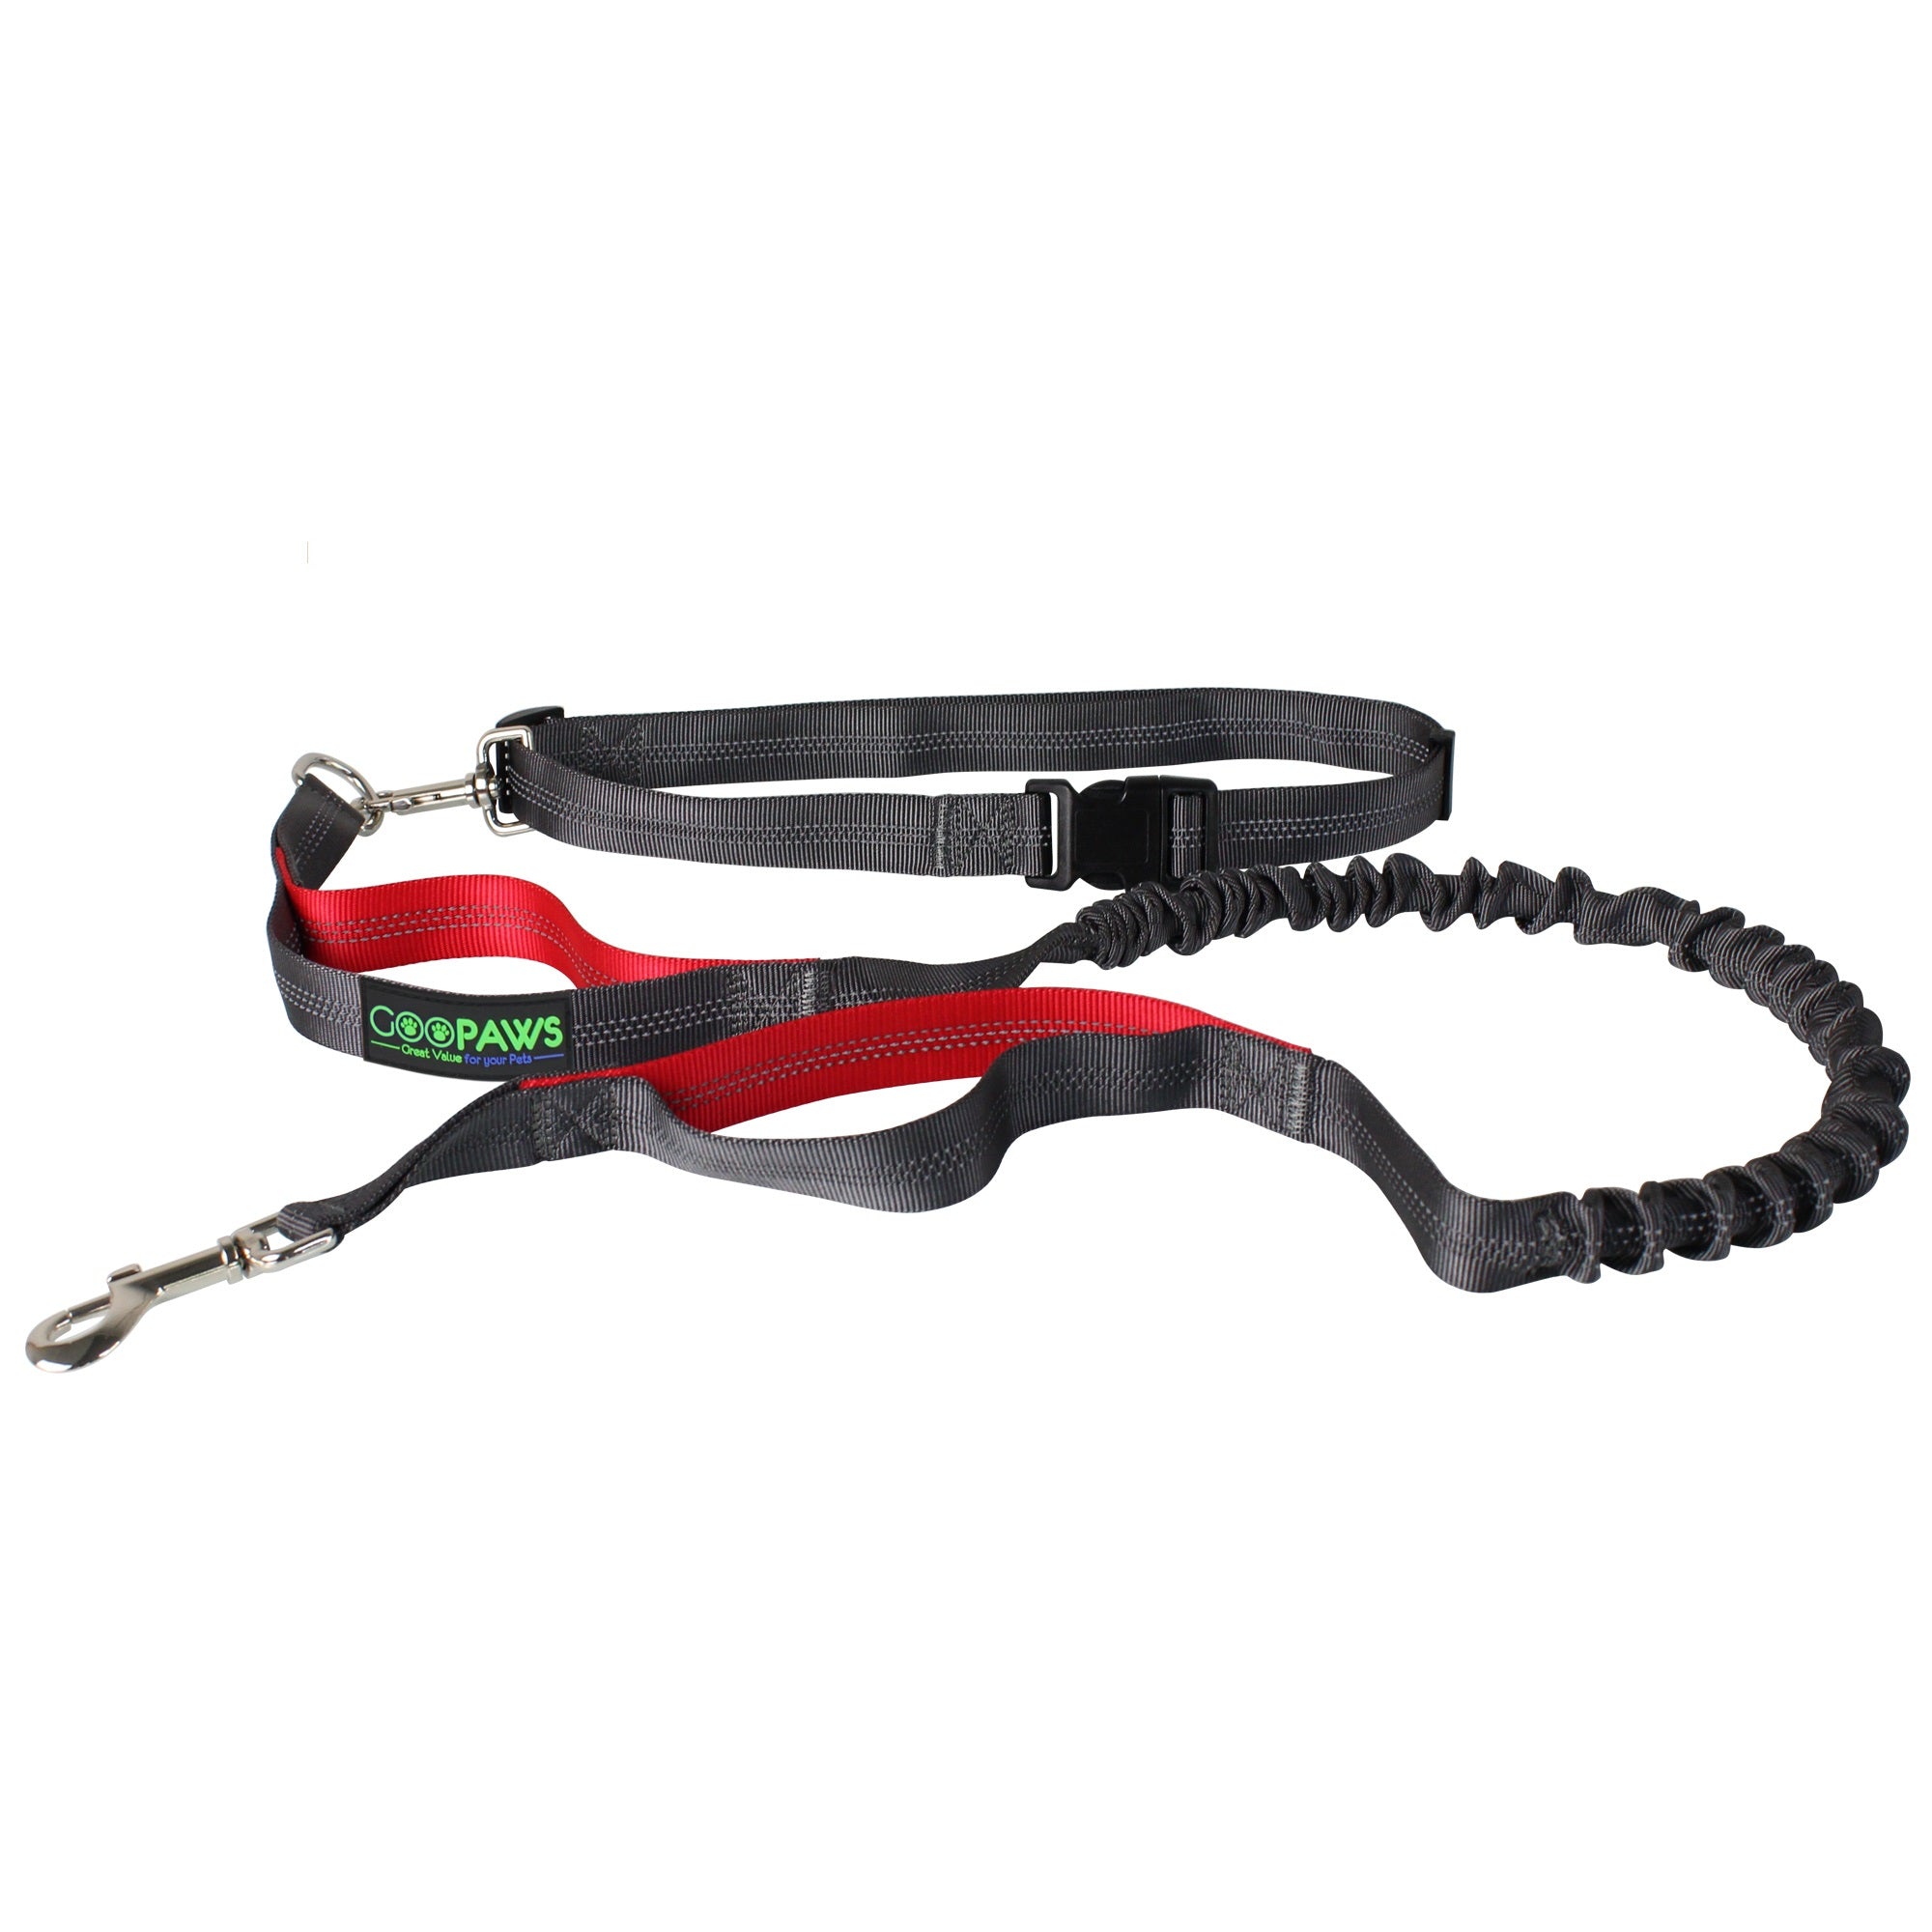 GOOPAWS No Pull Hand Free Bungee Dog Leash for Hiking, Running, Red